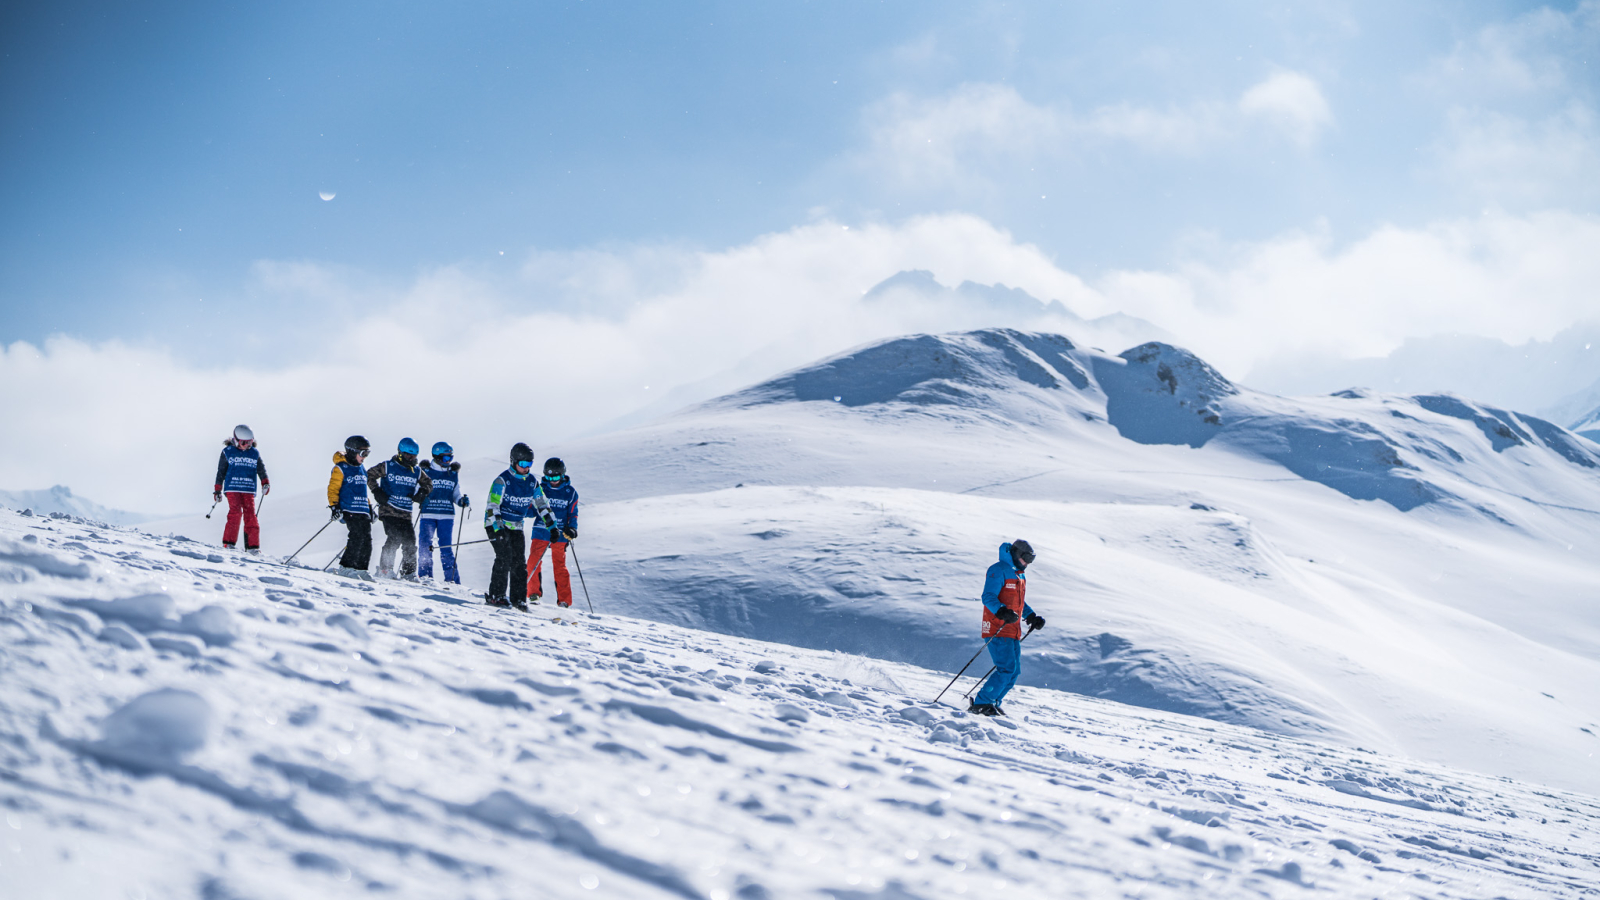 Are your teens too cool for (ski) school? Because we know your teenagers want something different from their ski lessons, we offer Pro-Rider group ski lessons in Grand Bornand.